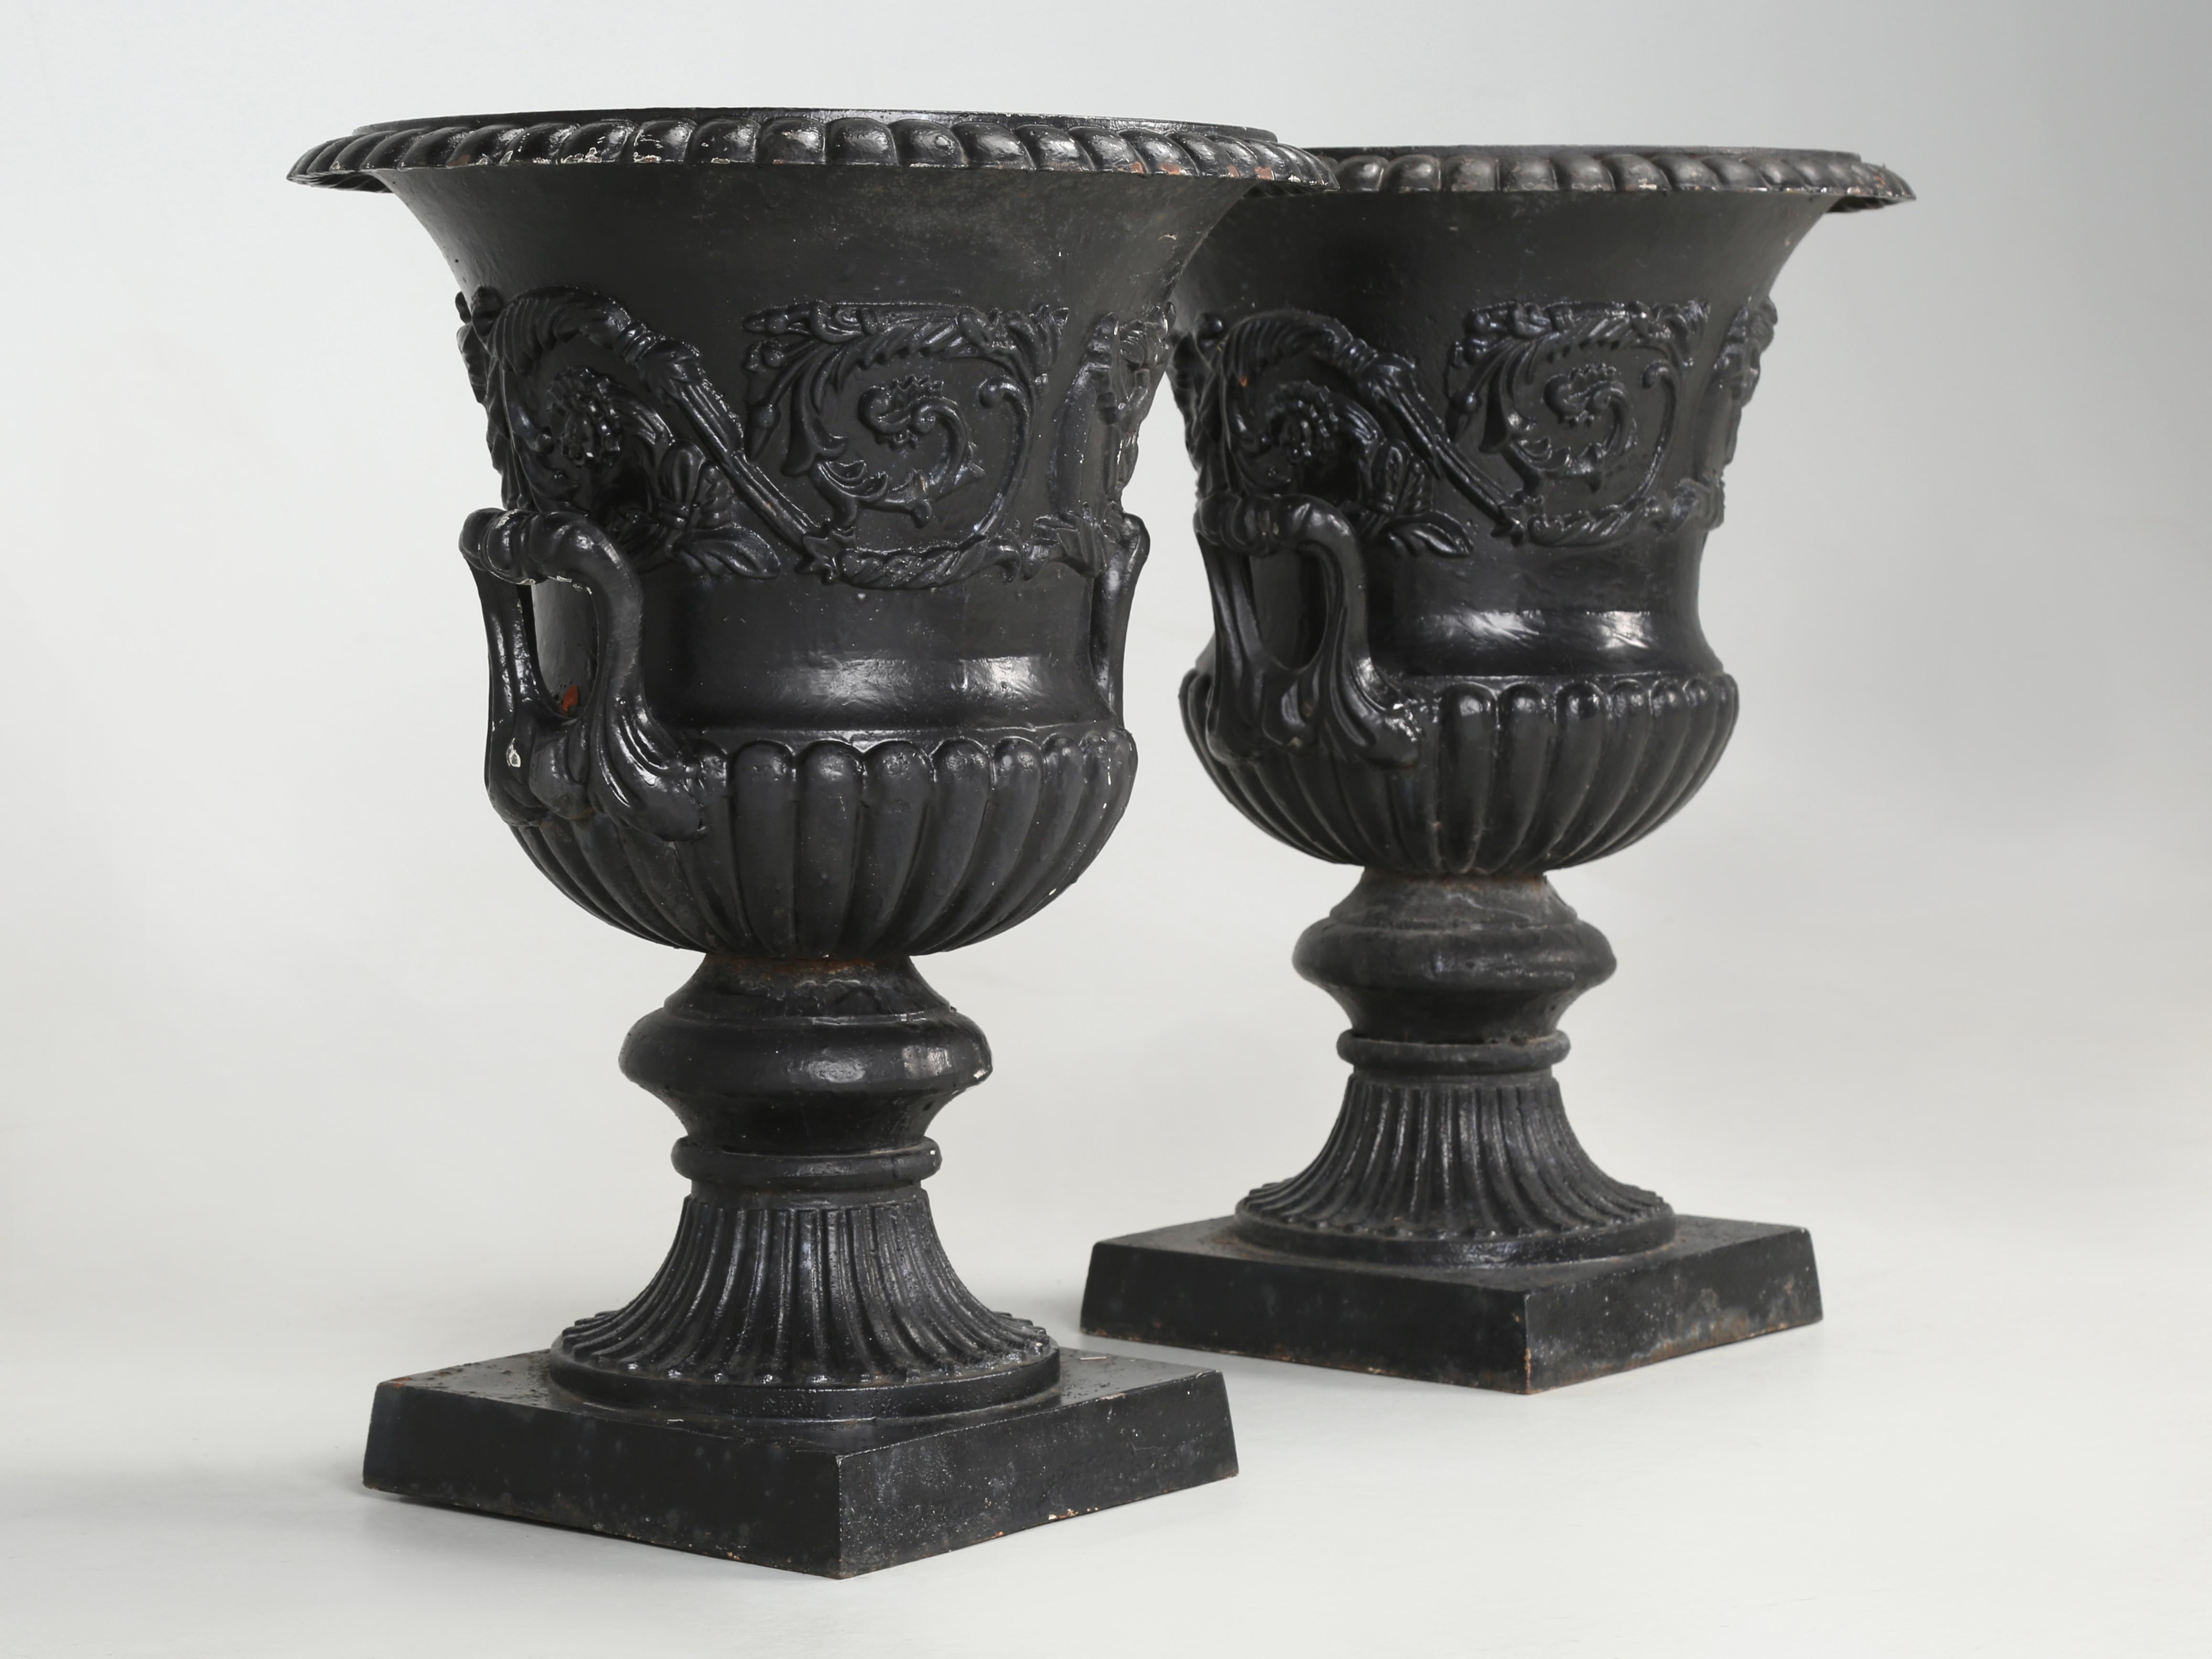 Pair of antique French cast iron garden urns in old paint. Please look at the top rim of one urn and you will note a prior repair that was done correctly by welding. There is also a hairline crack near the base on one urn.
**The bases are 10.5